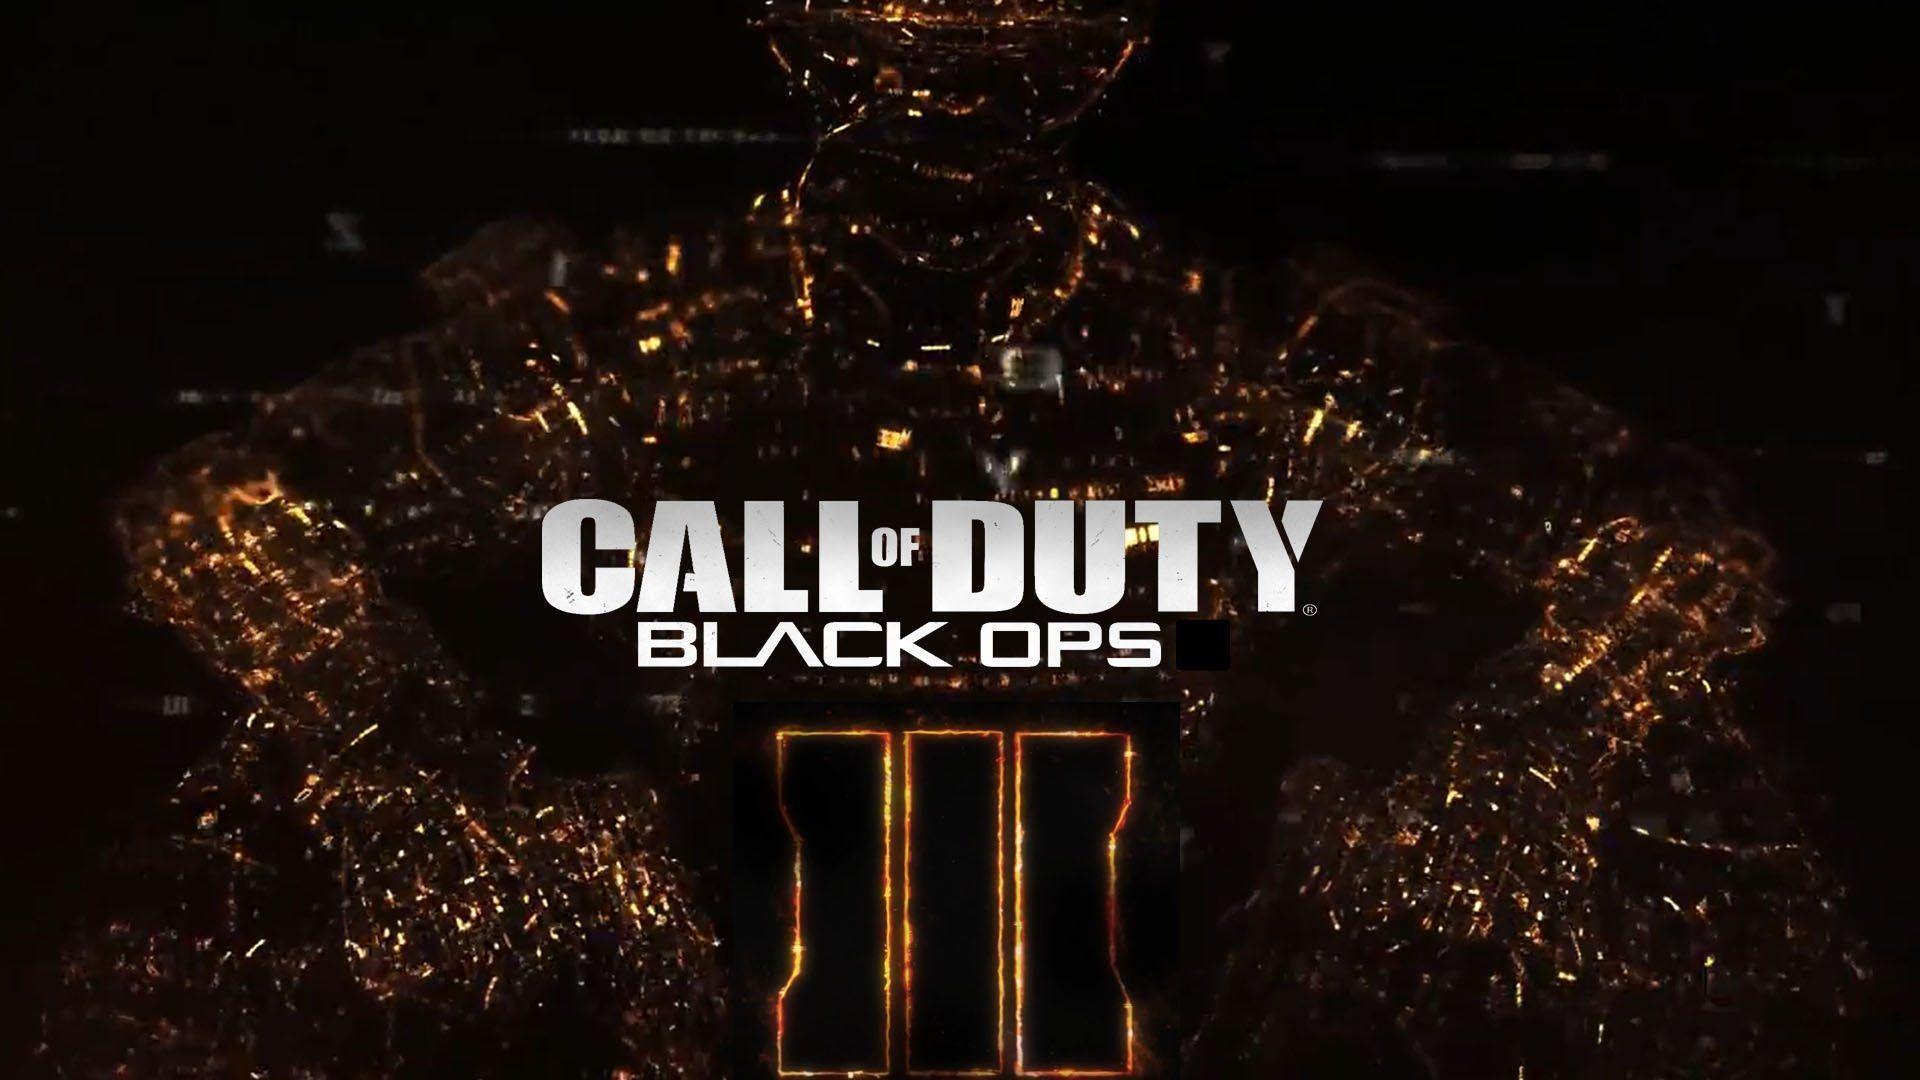 Call of Duty: Black Ops III Wallpaper, Picture, Image